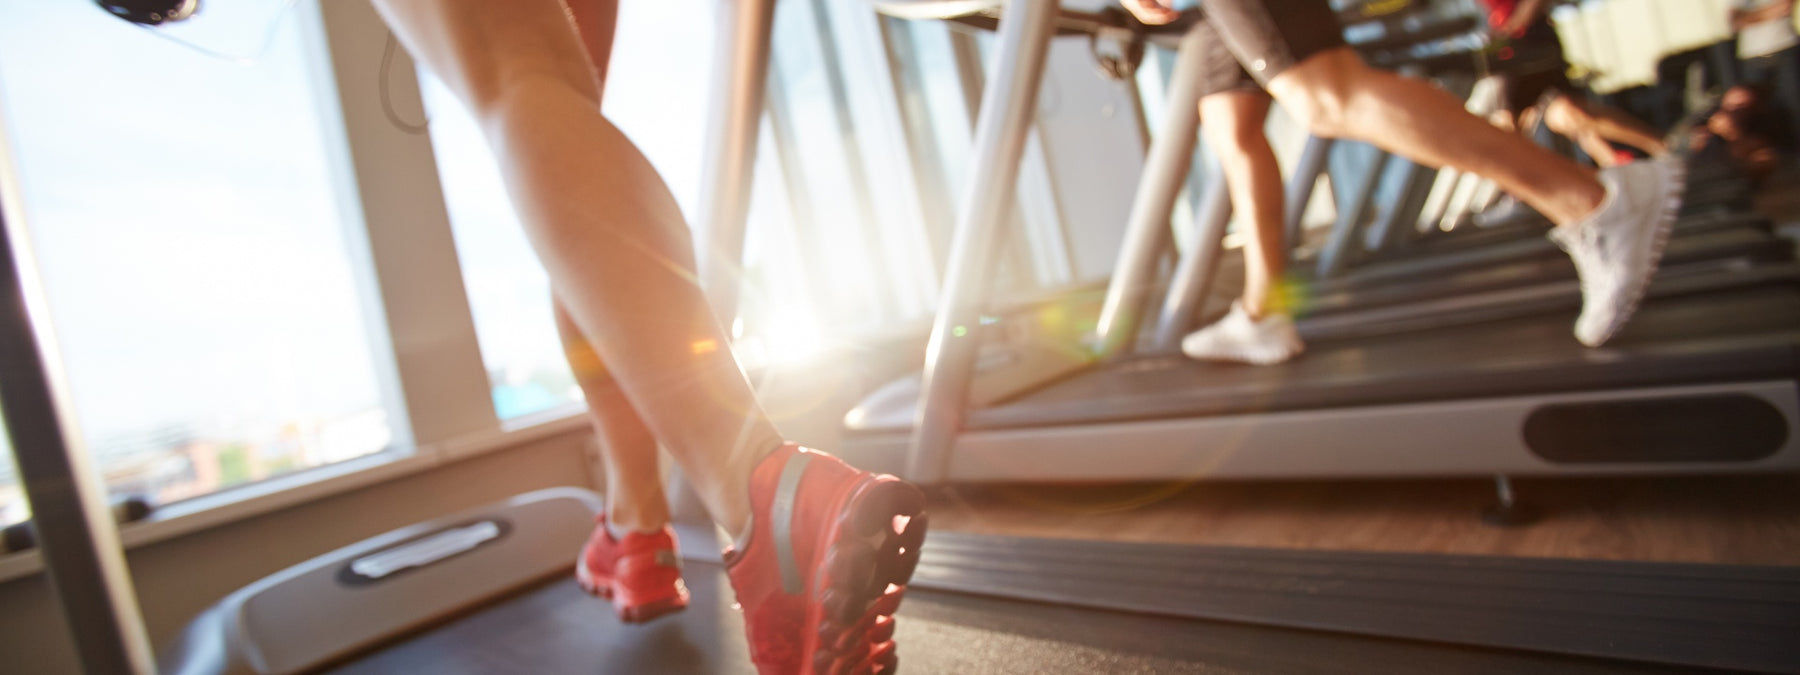 Is Fasted Cardio the Best for Burning Fat?